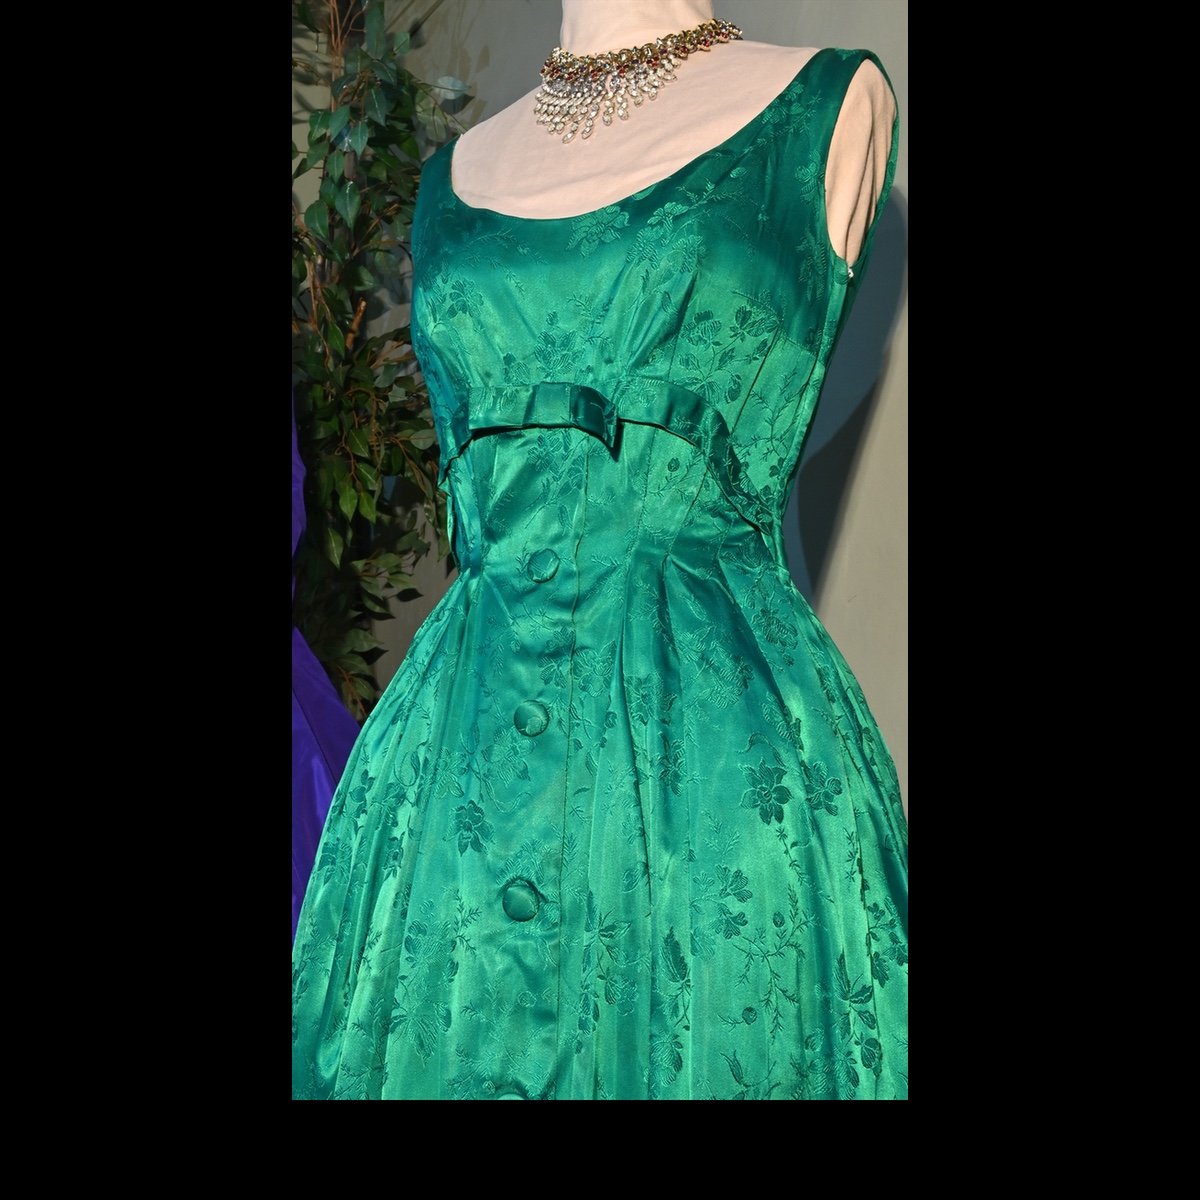 c.1955 Green evening gown